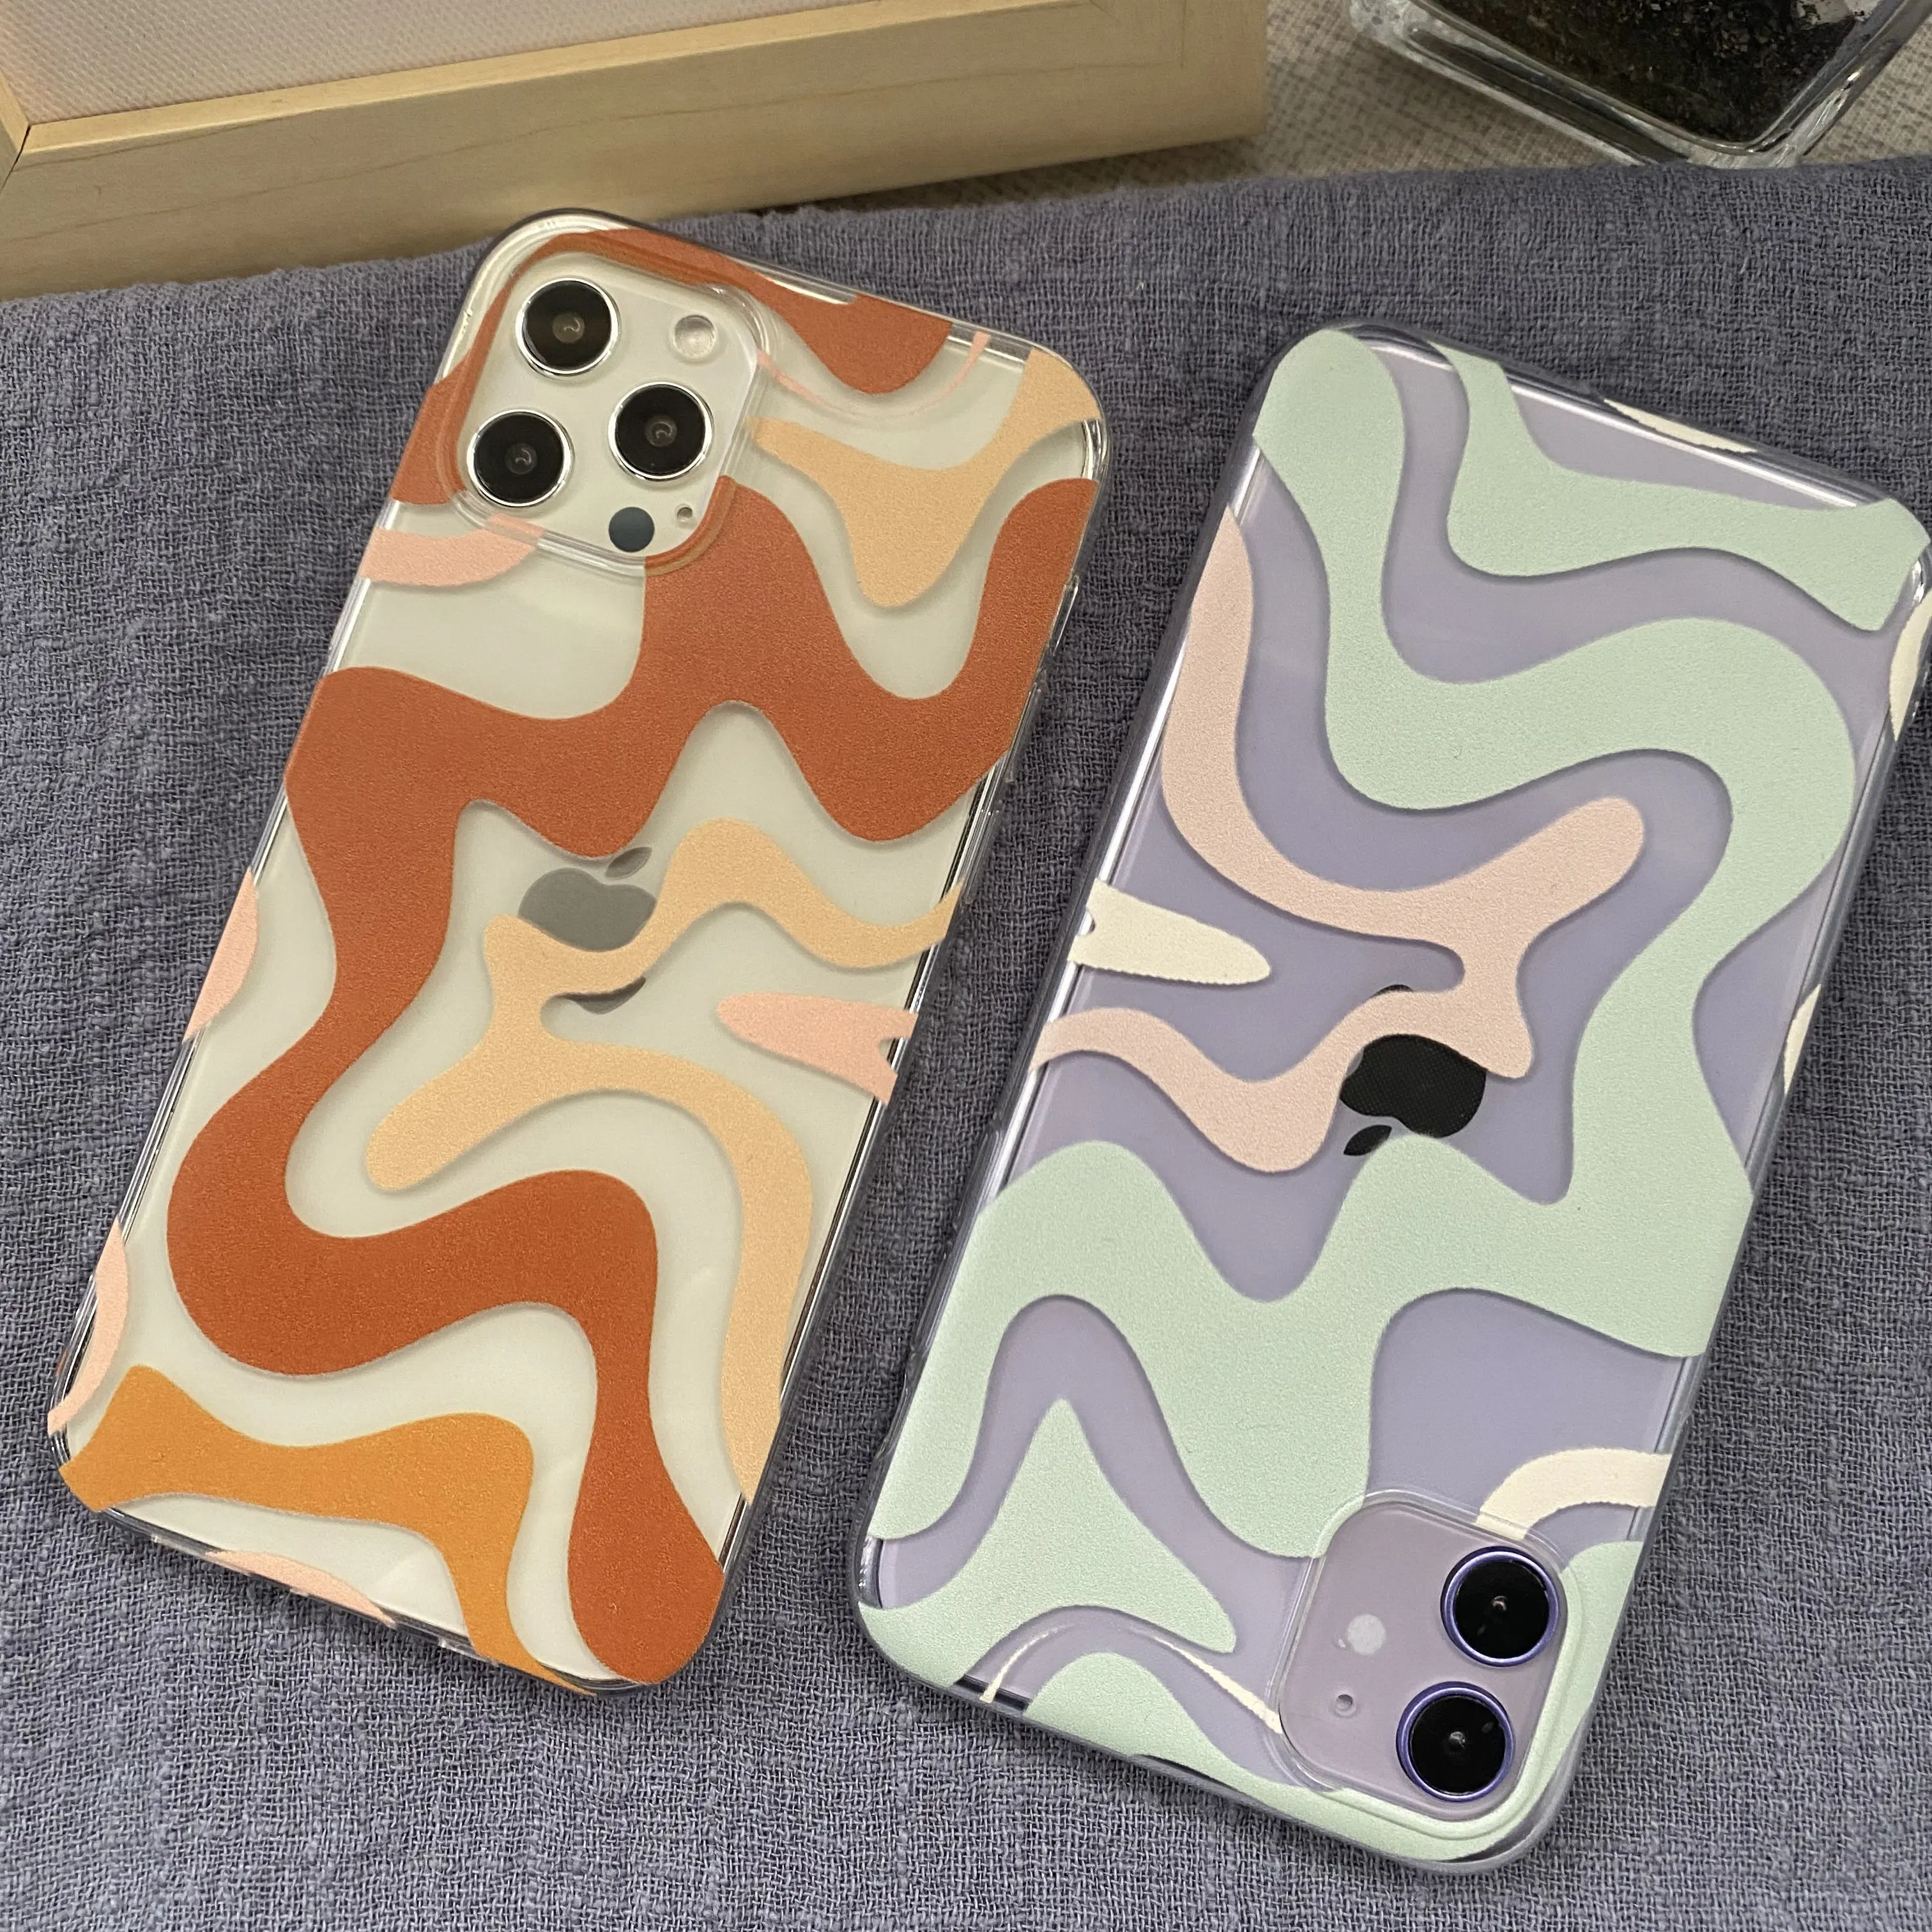 Liquid Swirl Abstract Pattern in Beige and Sage Green Phone Case for iPhone 11 12 pro XS MAX 8 7 6 6S Plus X 5S SE 2020 XR case